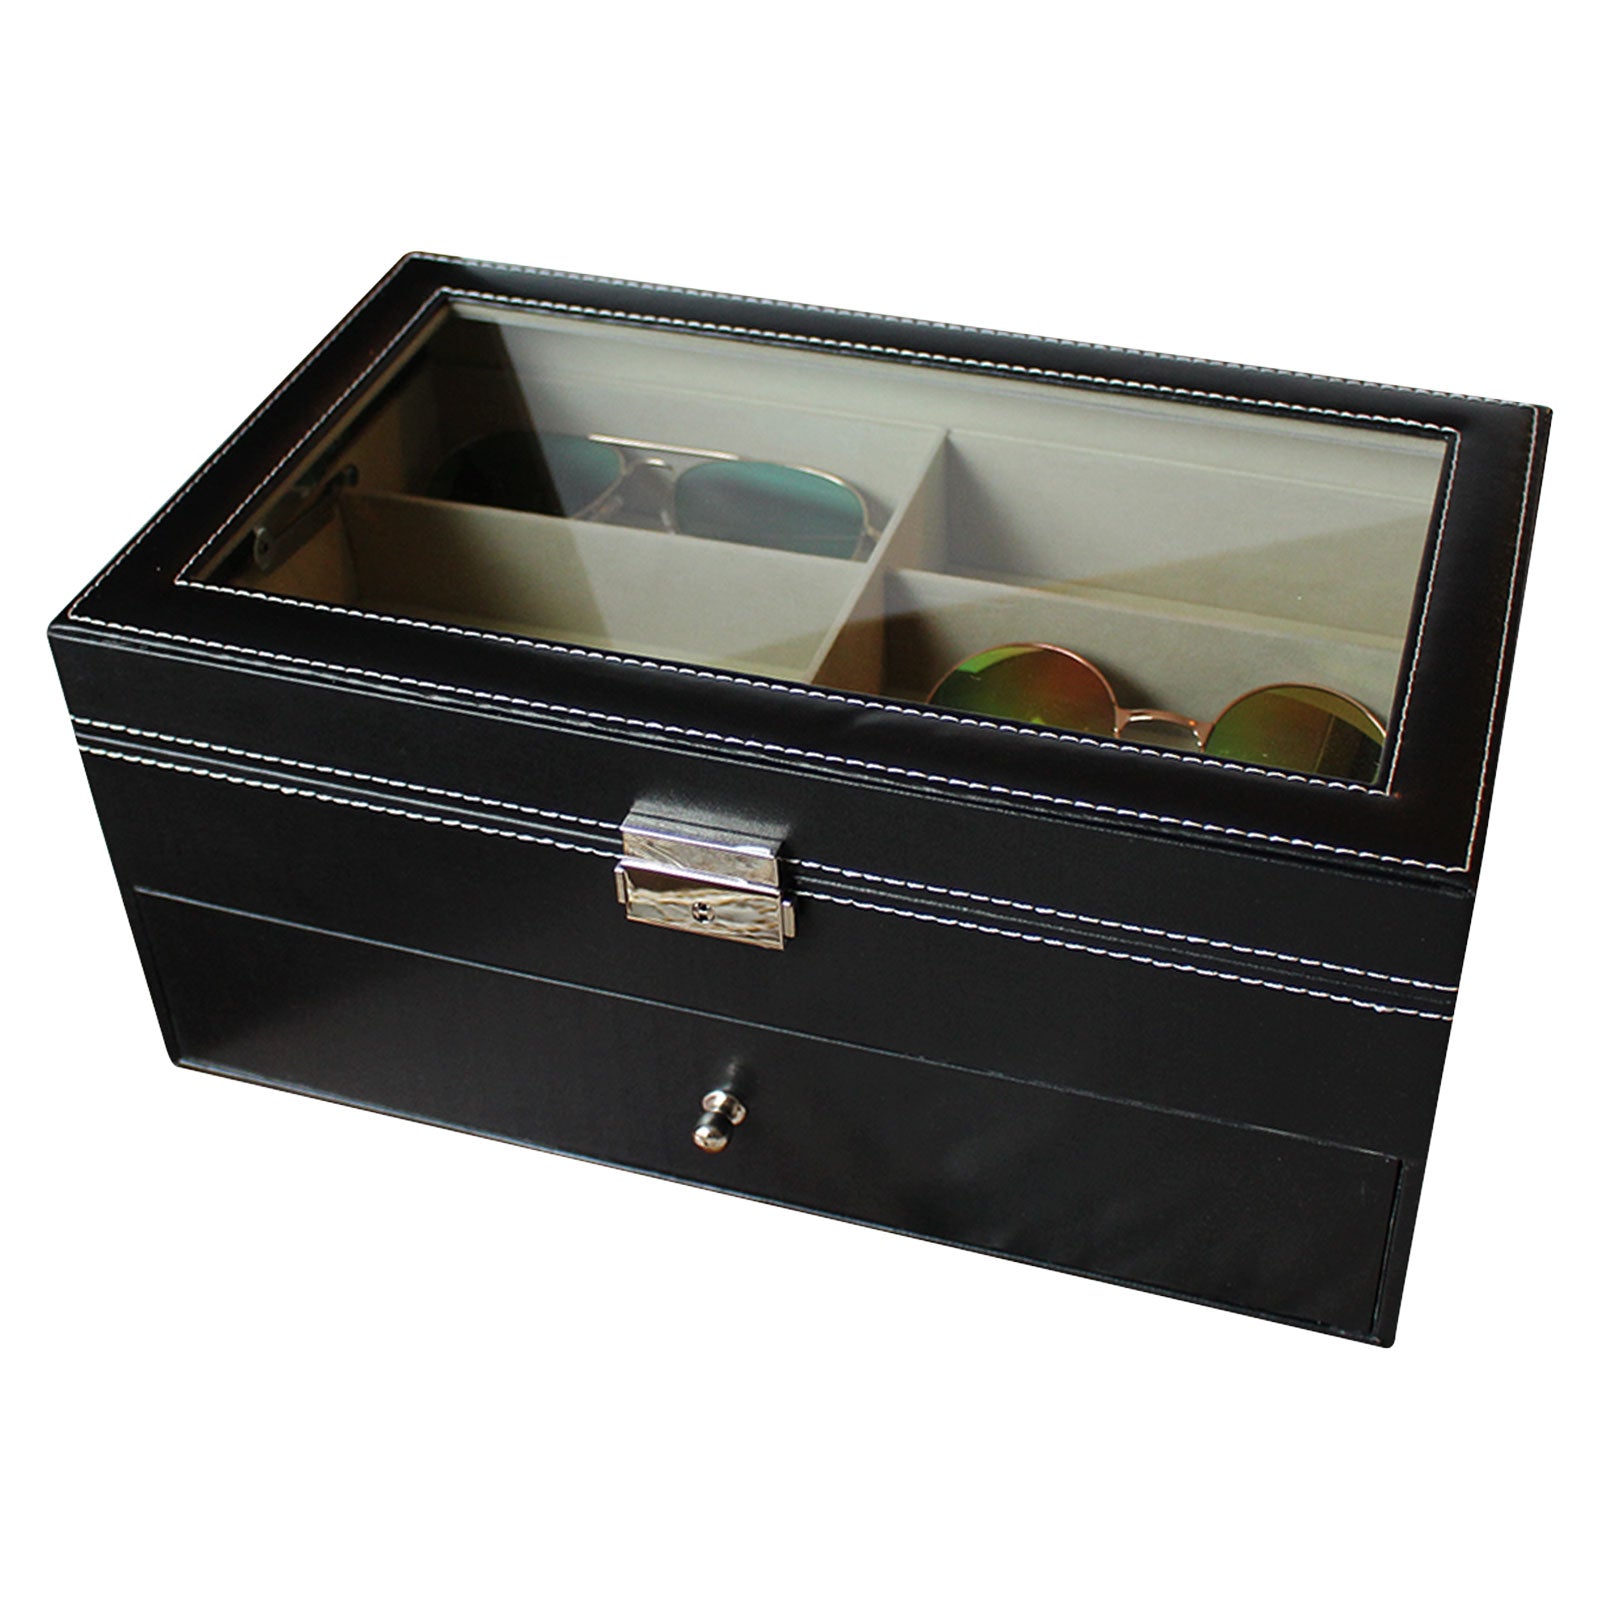 Sunglasses Display Case - 12 Compartments of Eyeglass Organizer